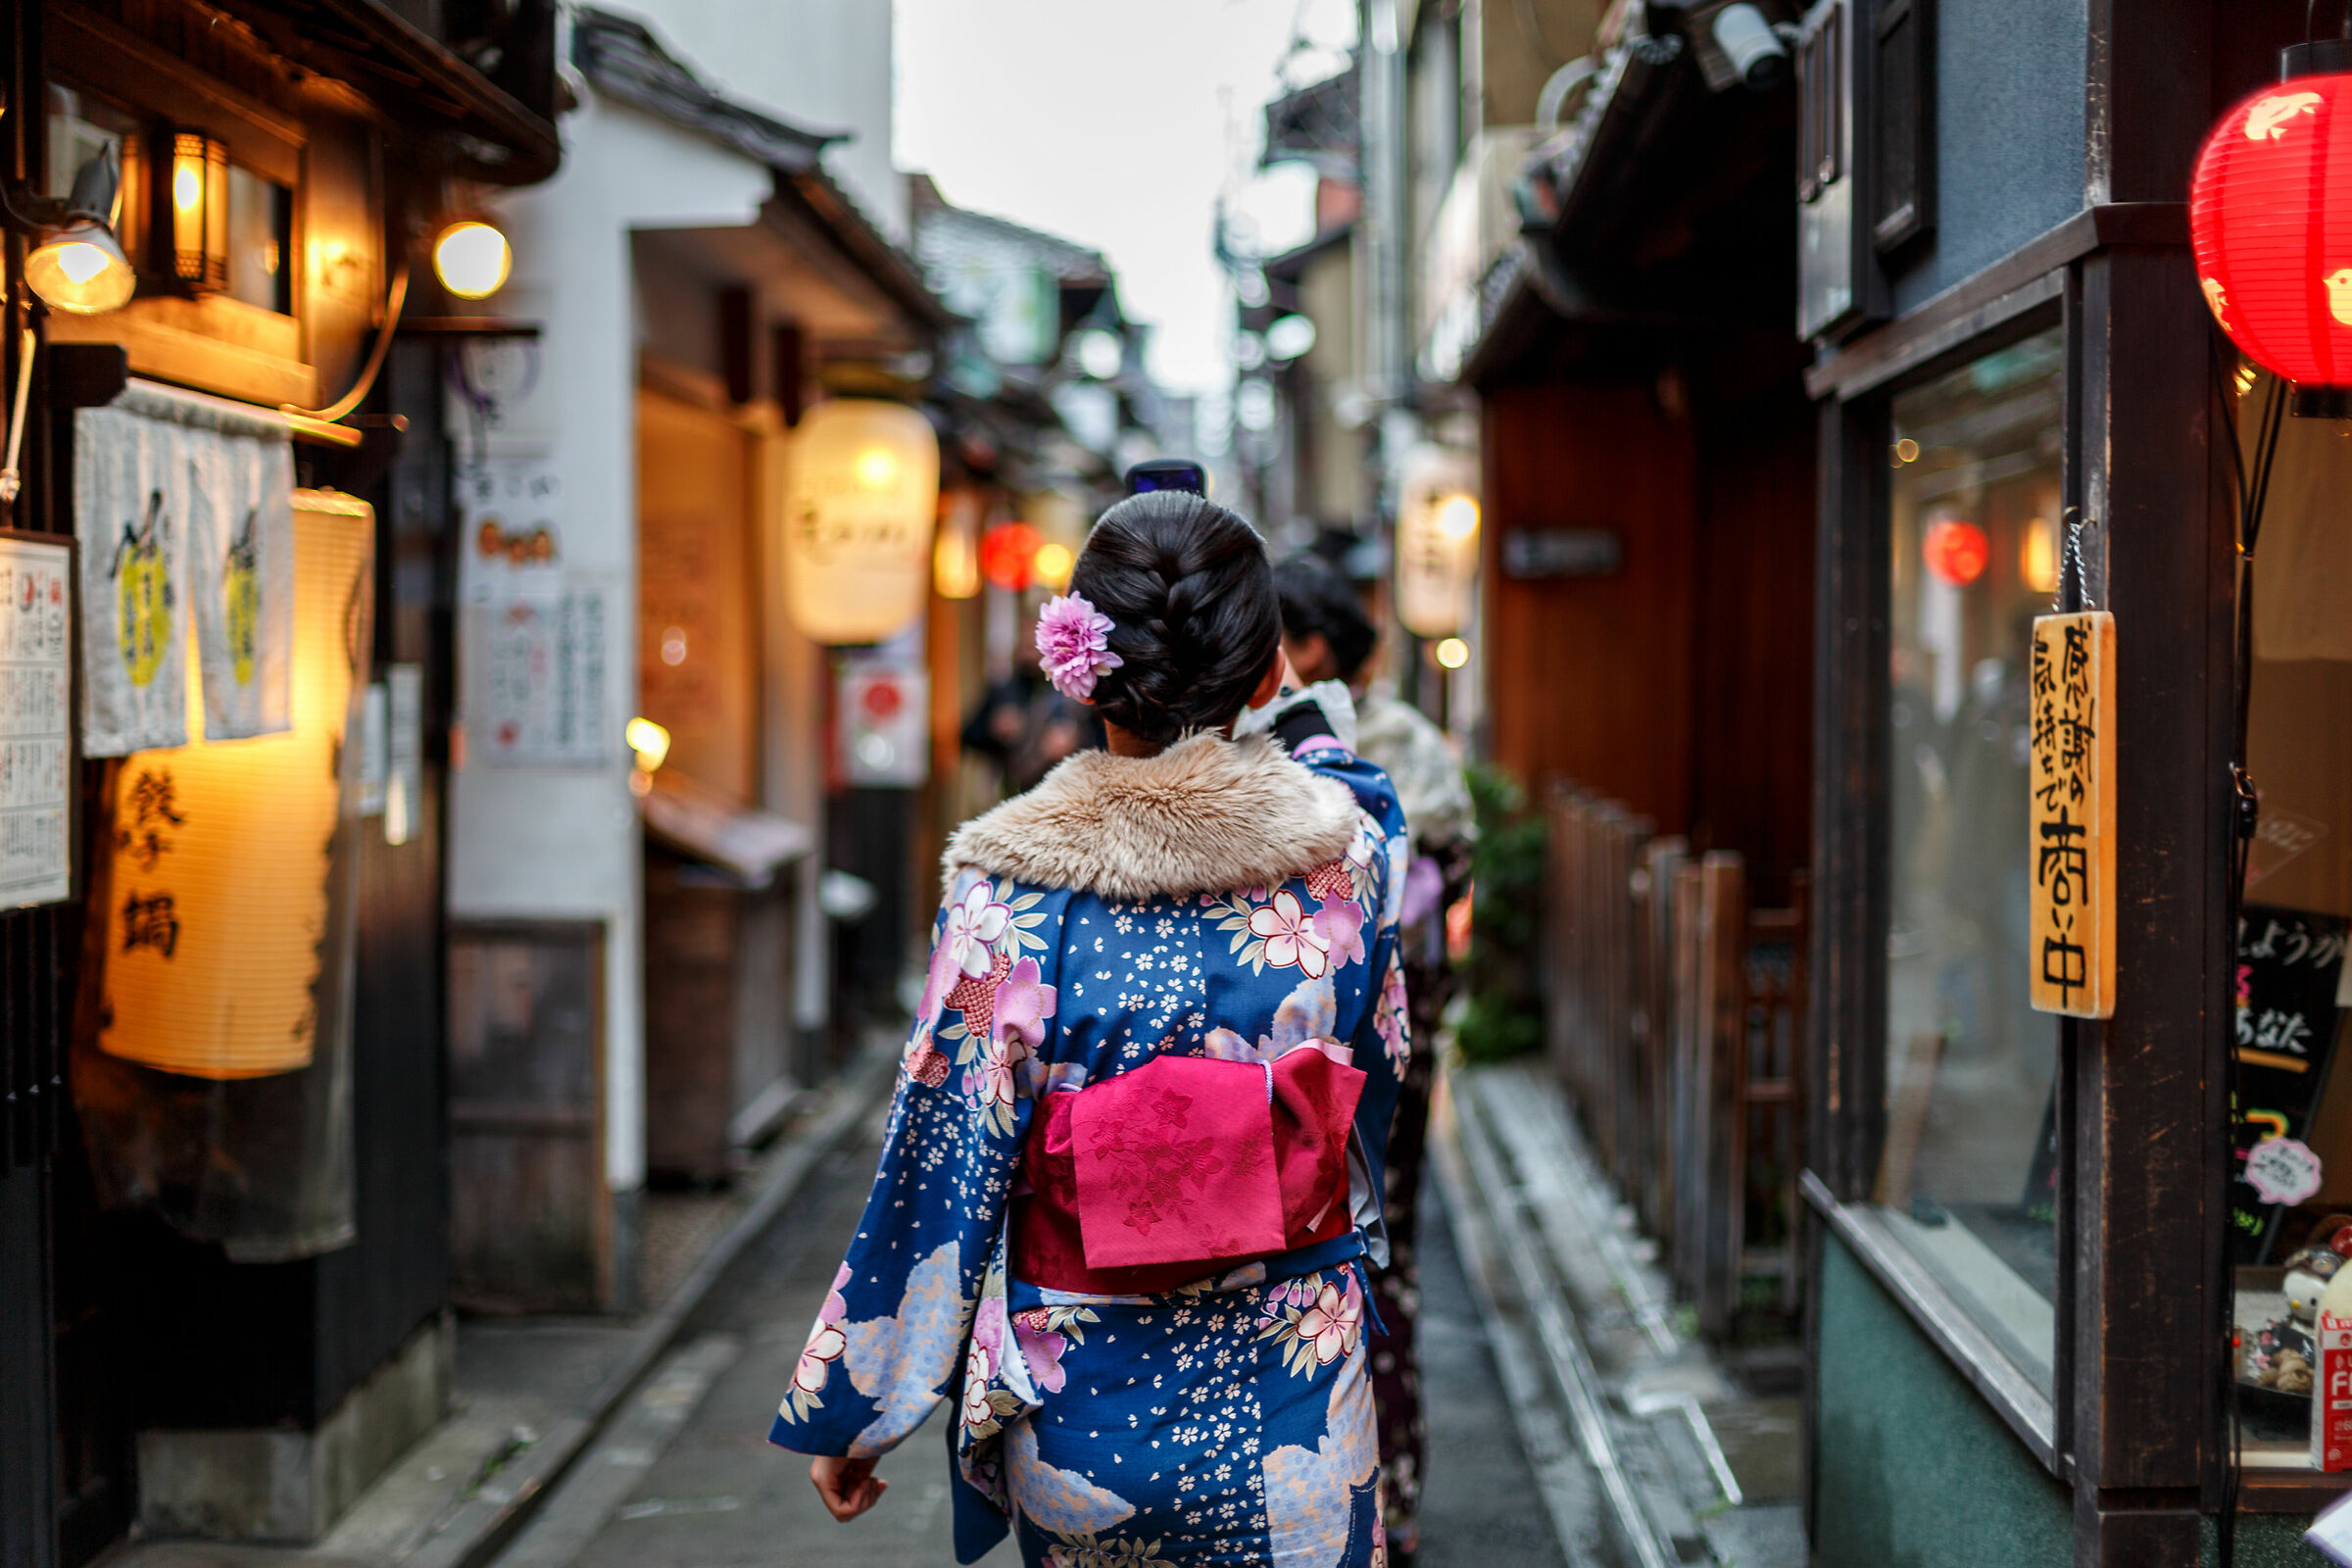 Through the streets of Kyoto...